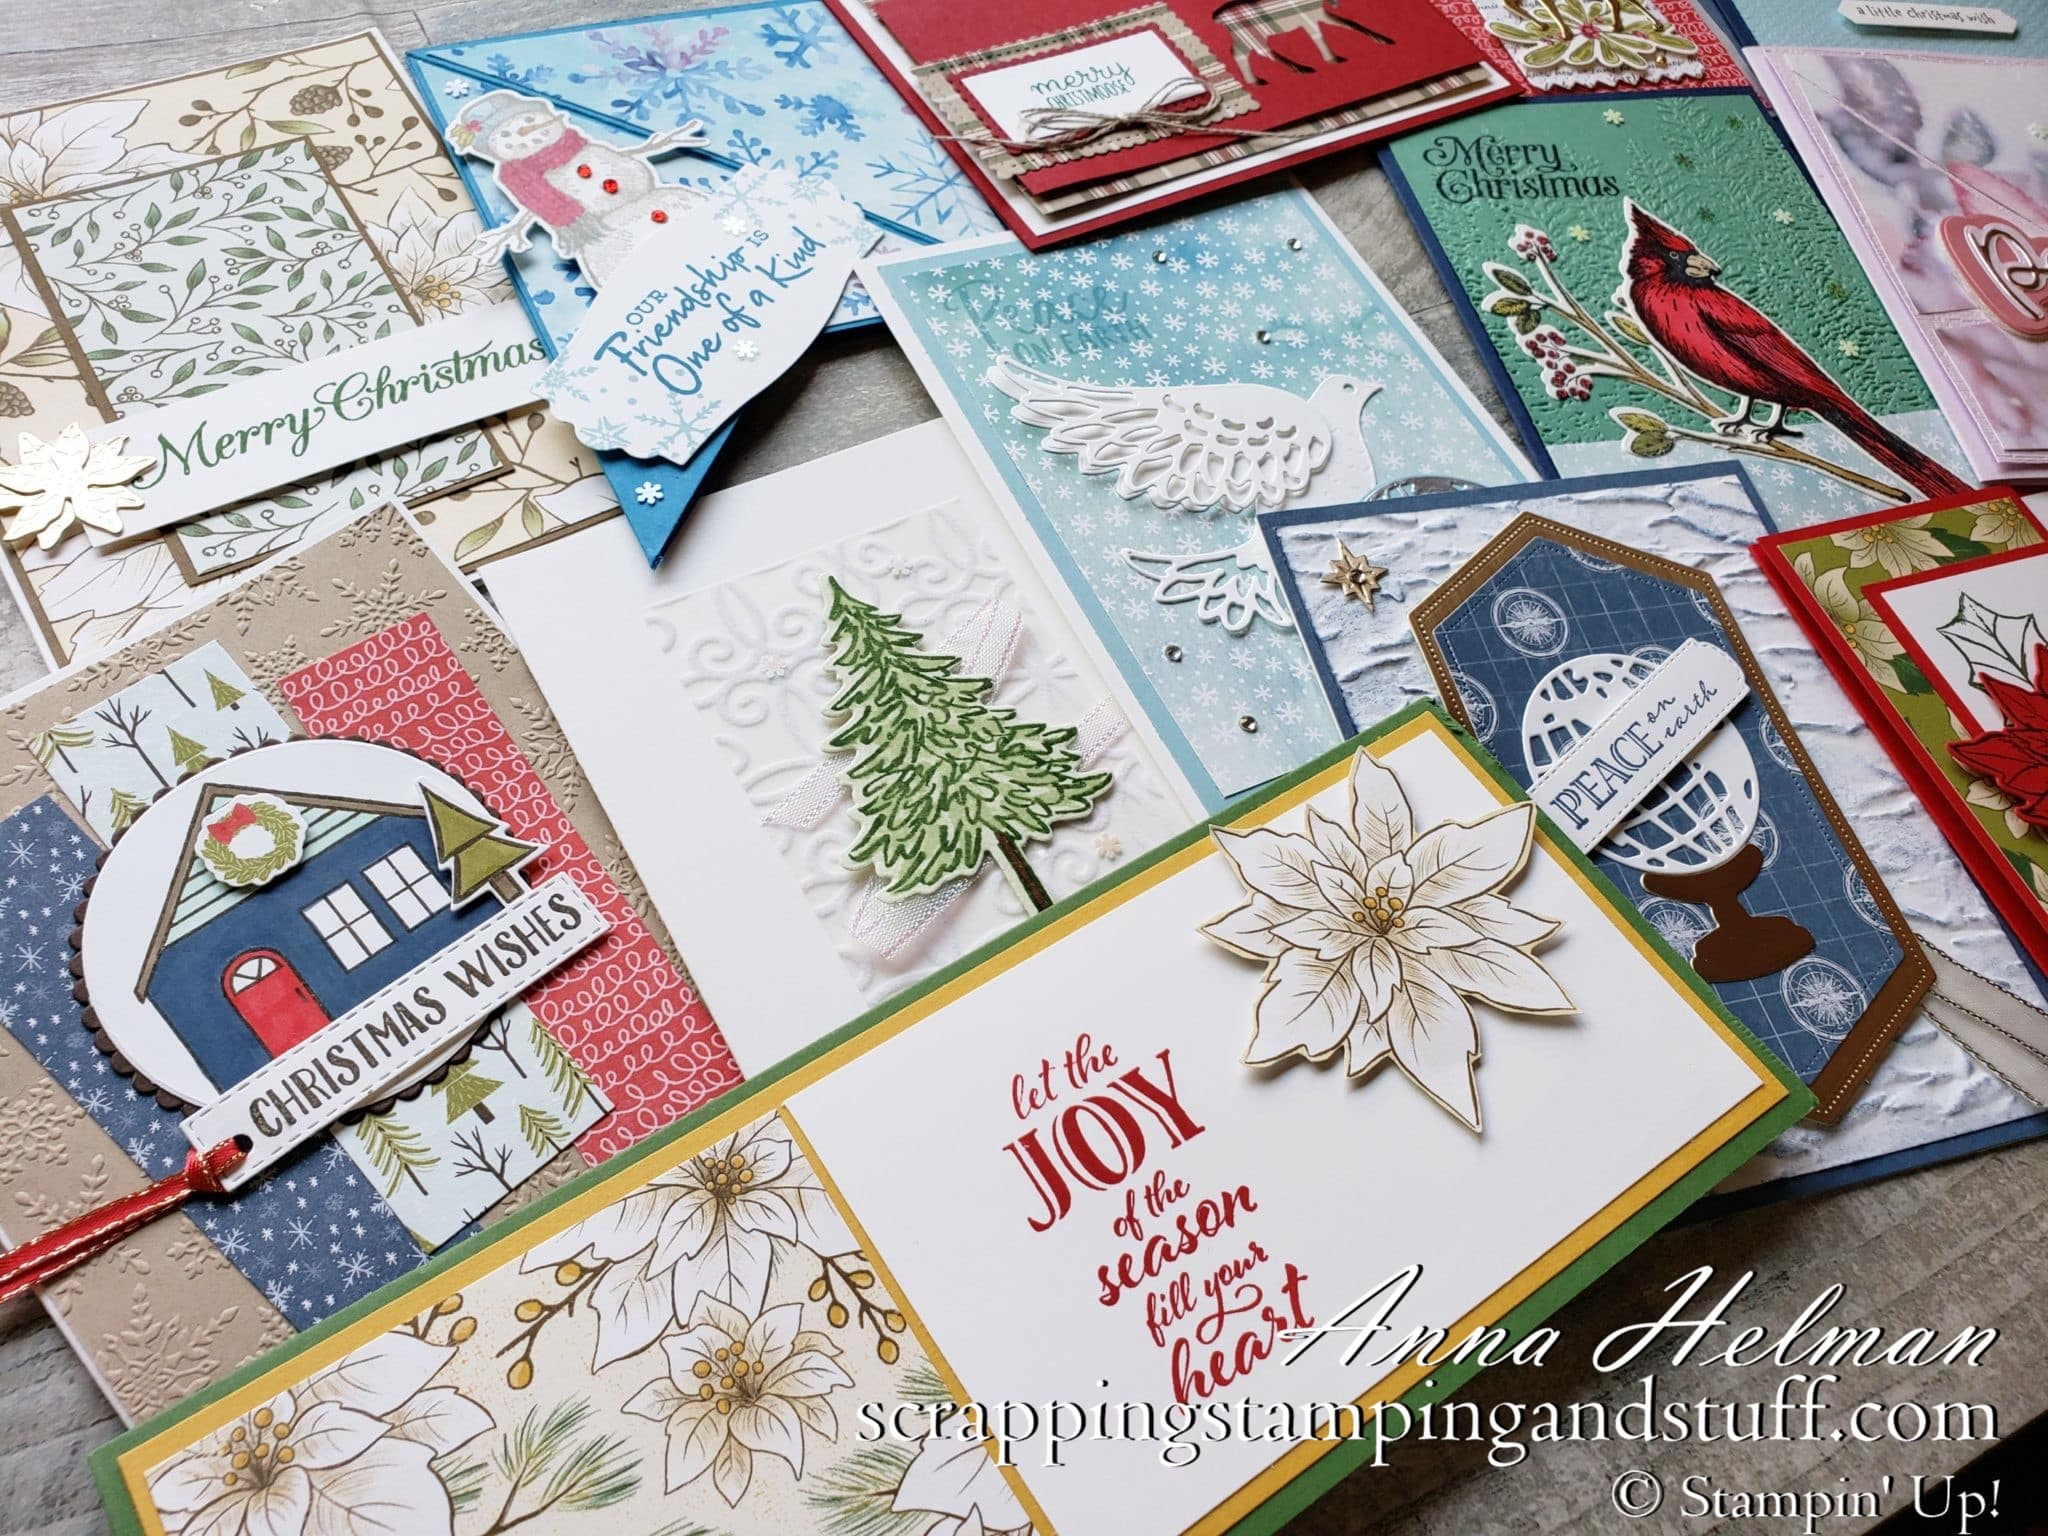 Amazing Christmas Card Ideas From My Stampin Up OnStage Demonstrator Swap Cards